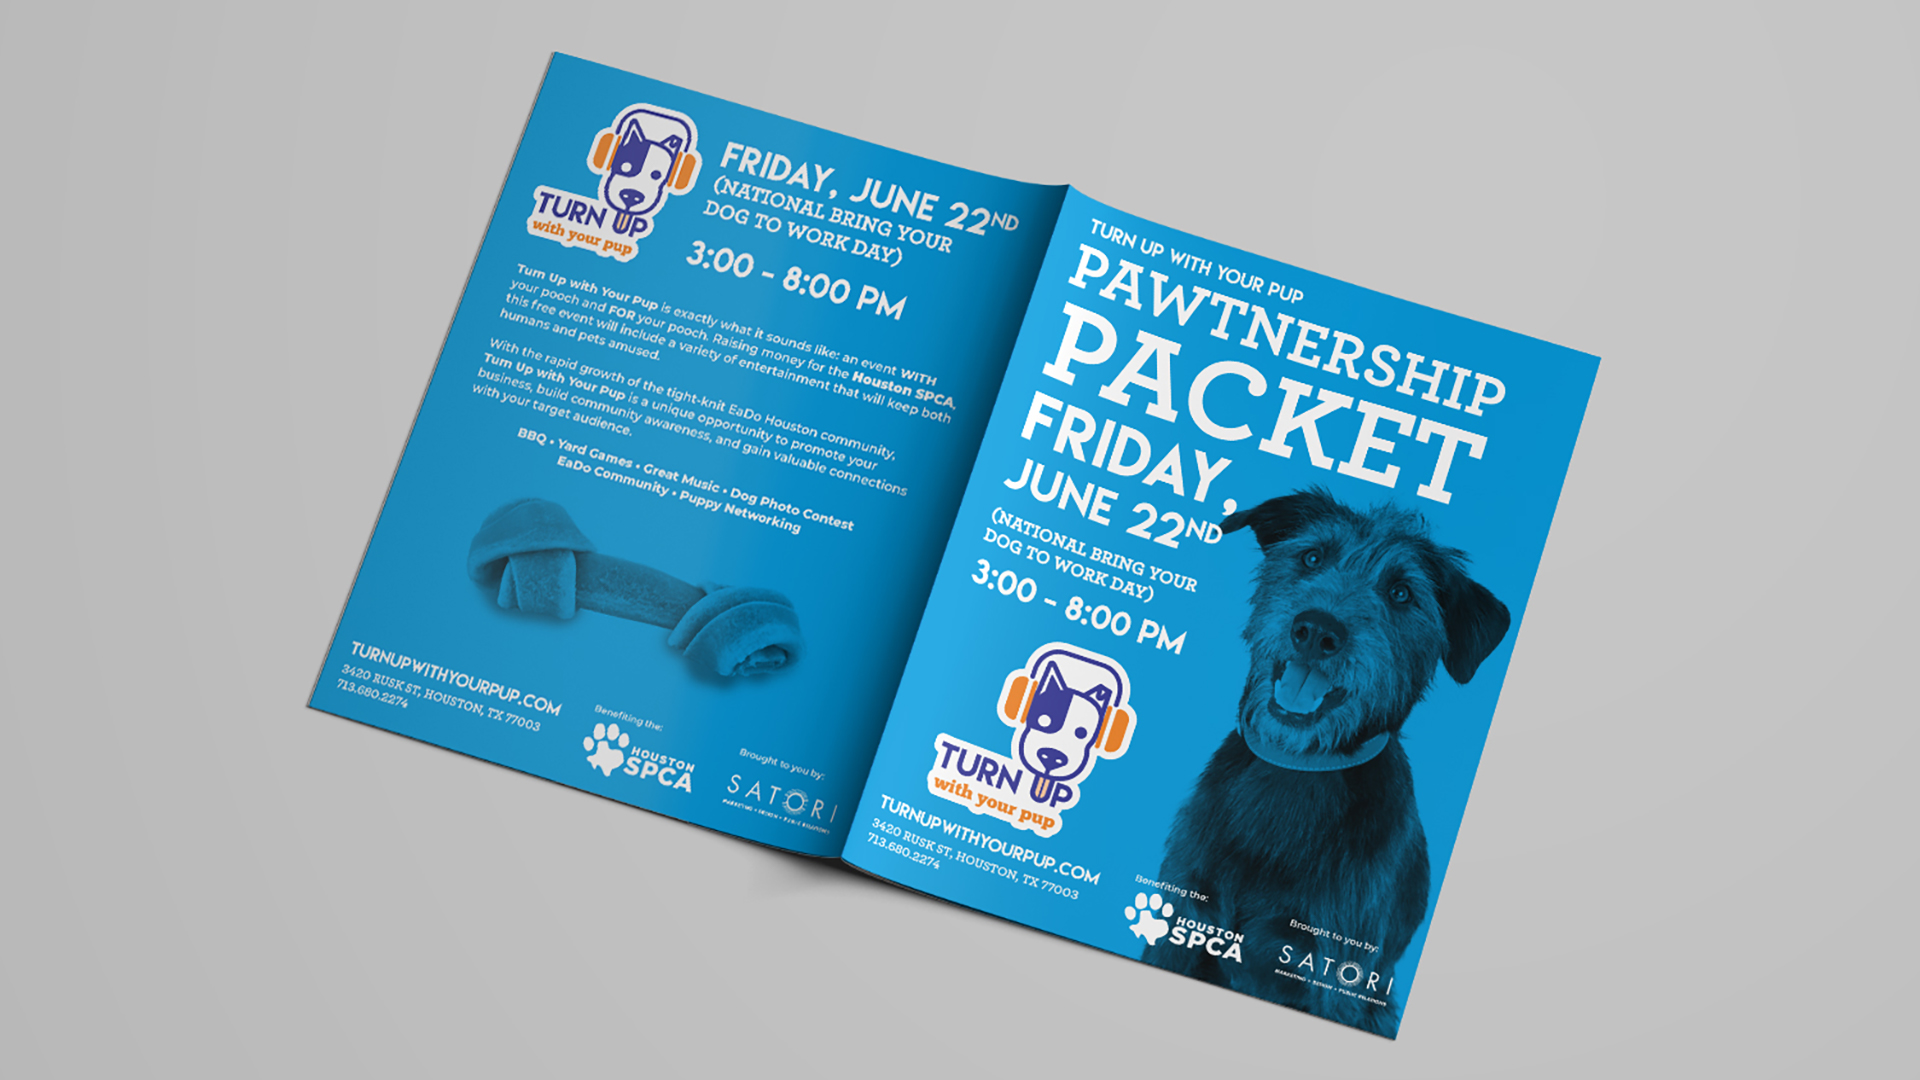 Turn Up With Your Pup Pawtnership Packet